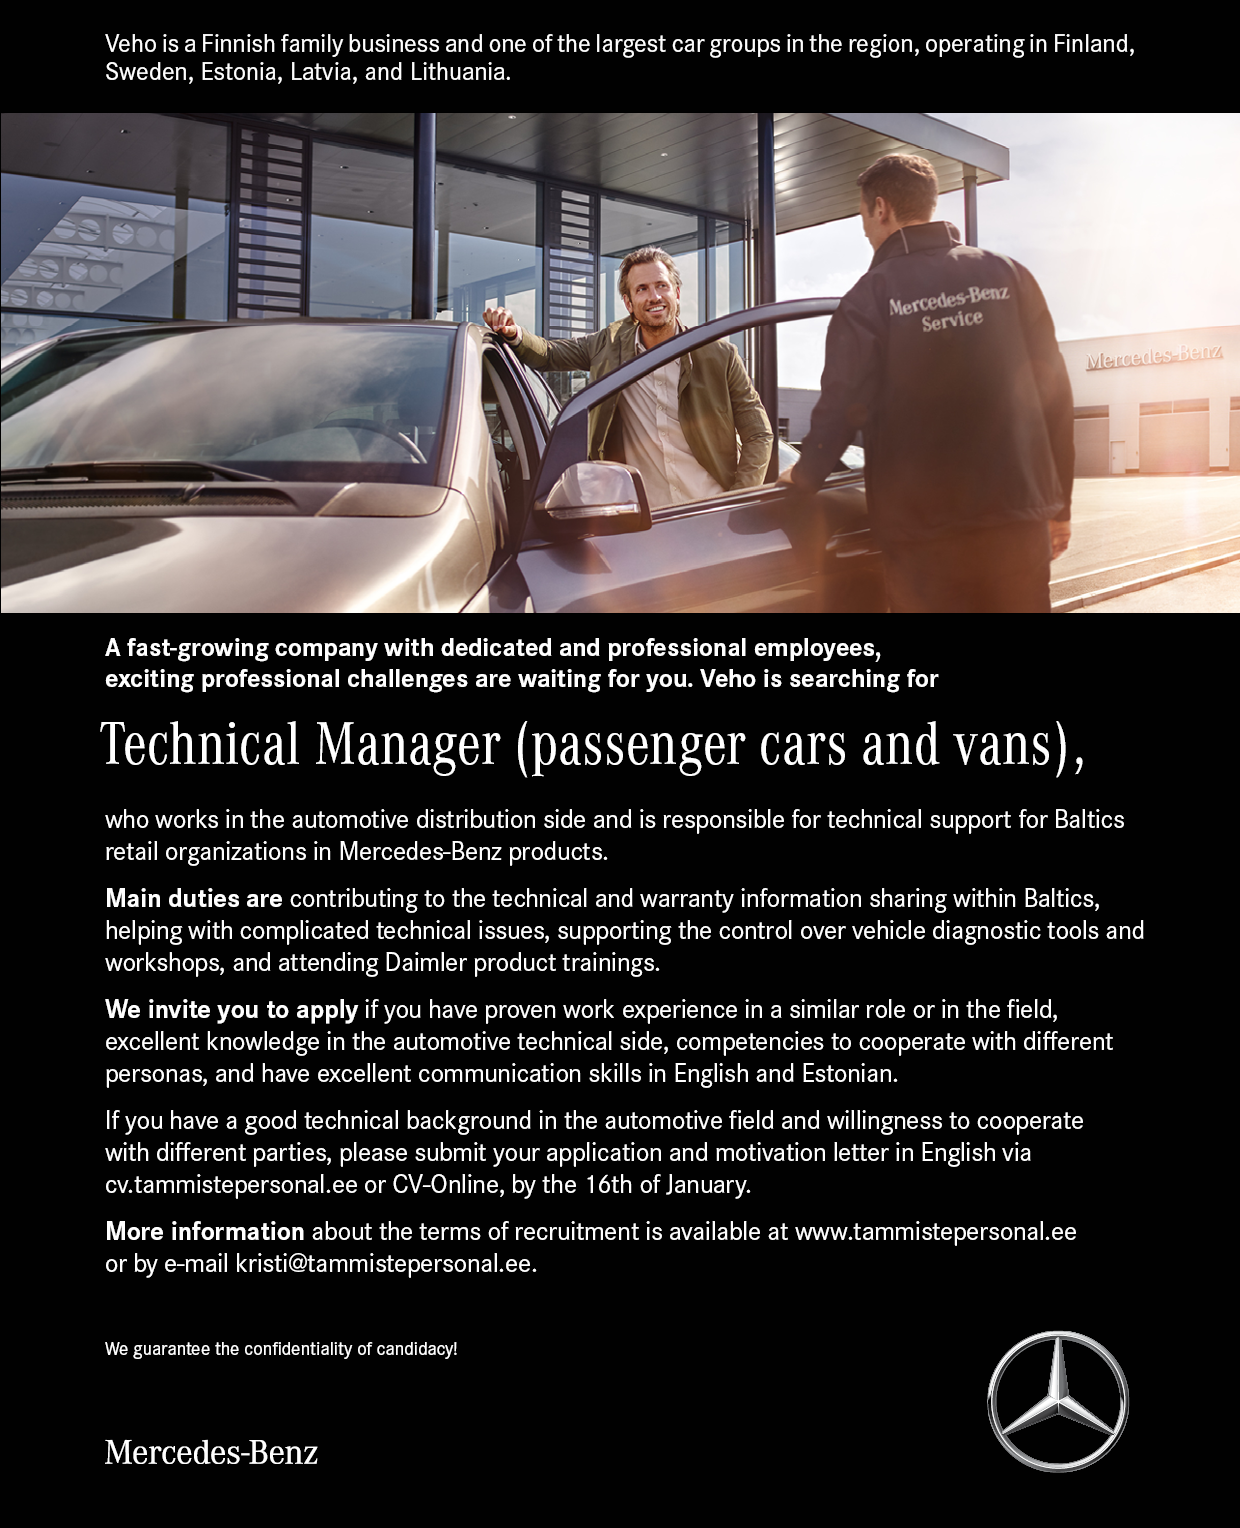 TECHNICAL MANAGER (PASSENGER CARS AND VANS)